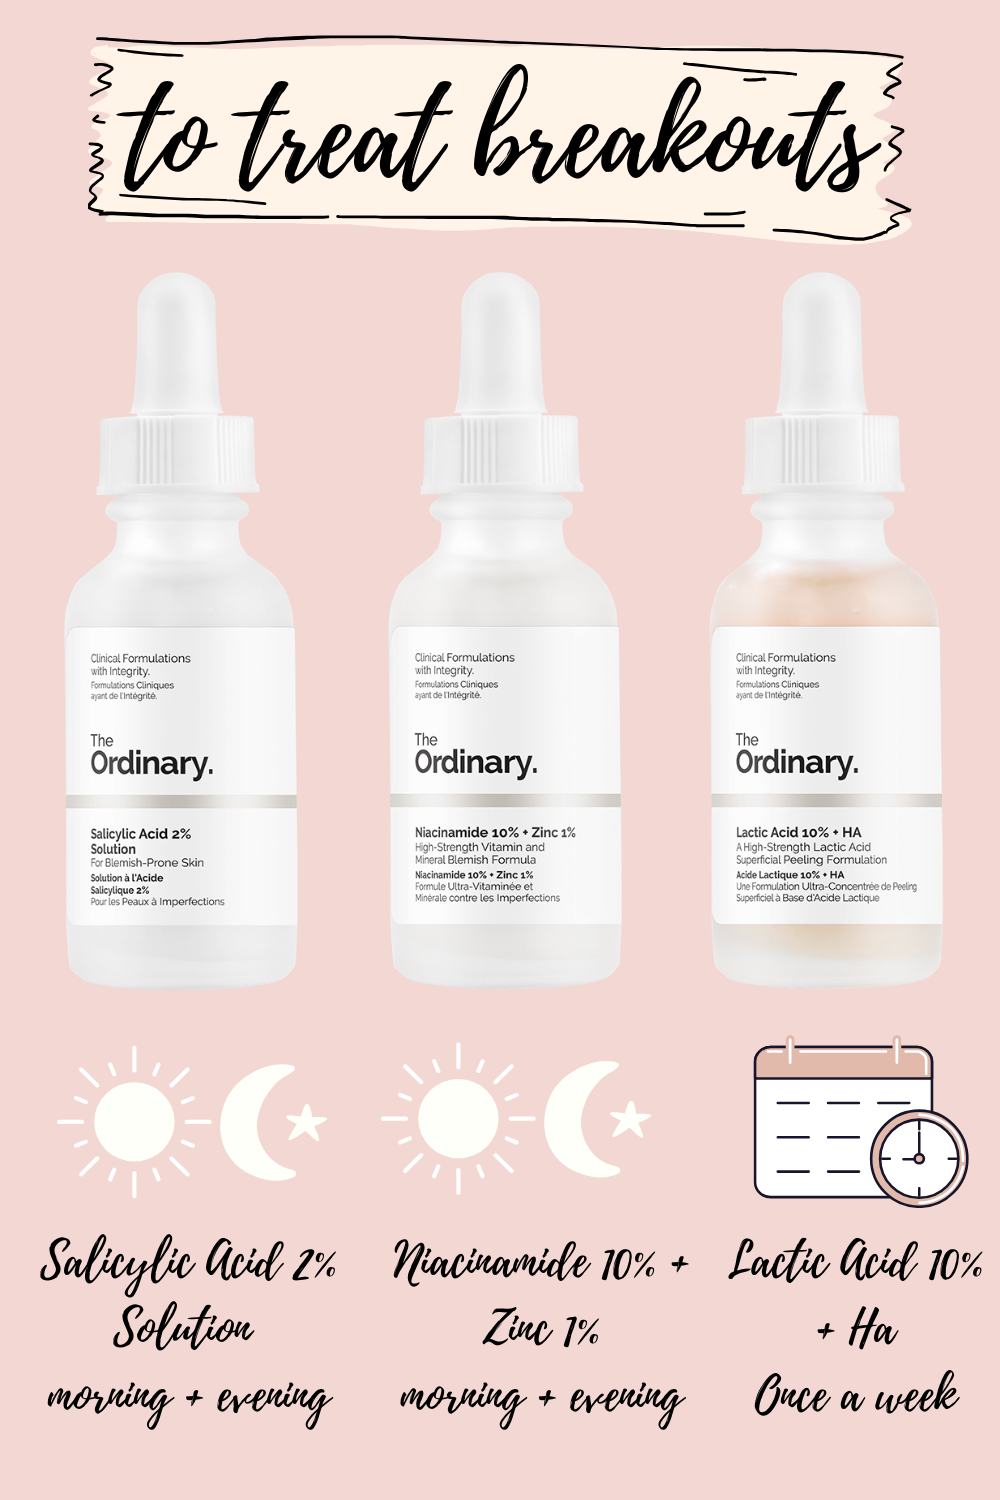 the ordinary skincare routine for breakouts